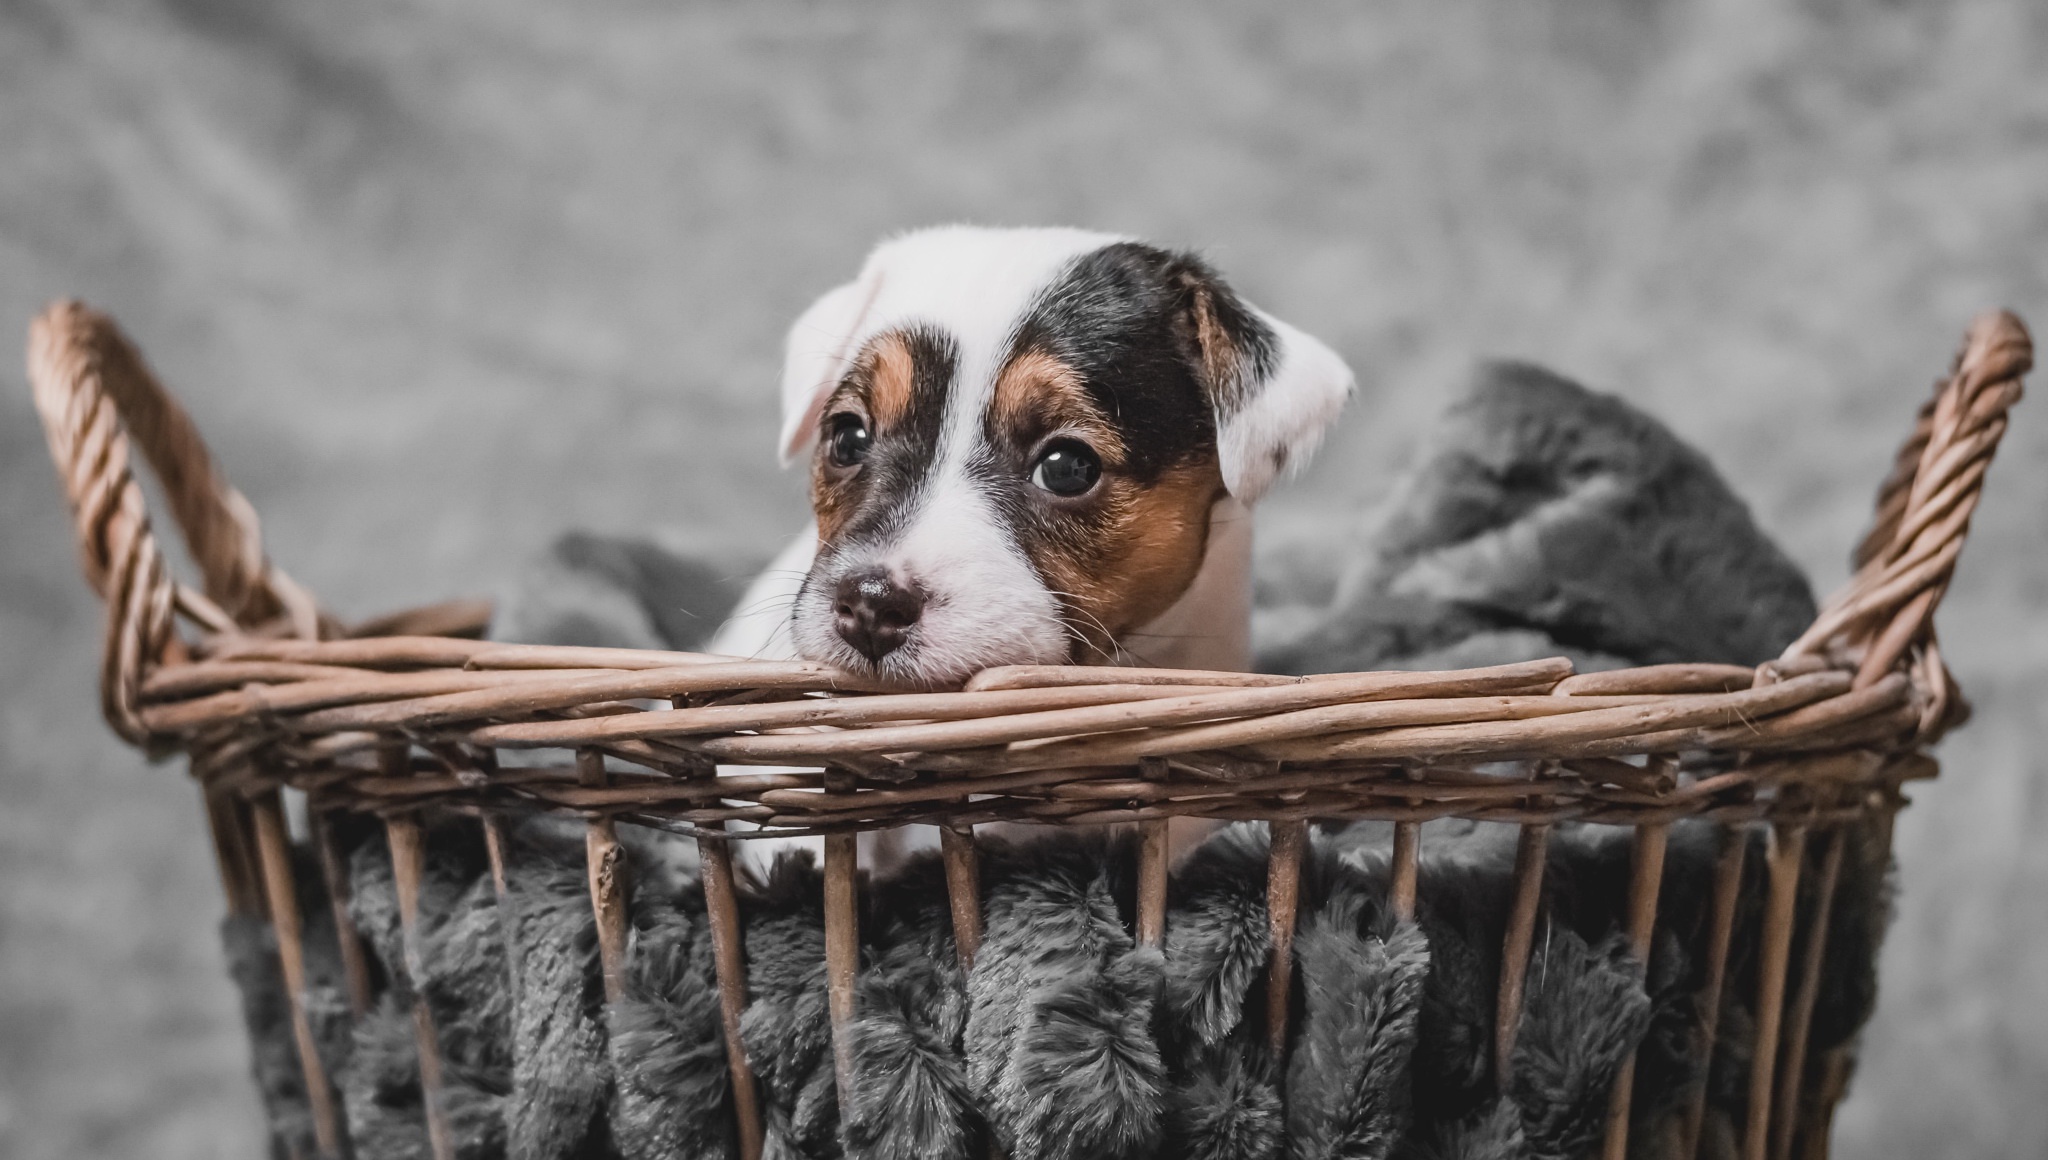 Jack Russell Terrier Dog Basket Puppy Baby Animal Muzzle 2048x1160